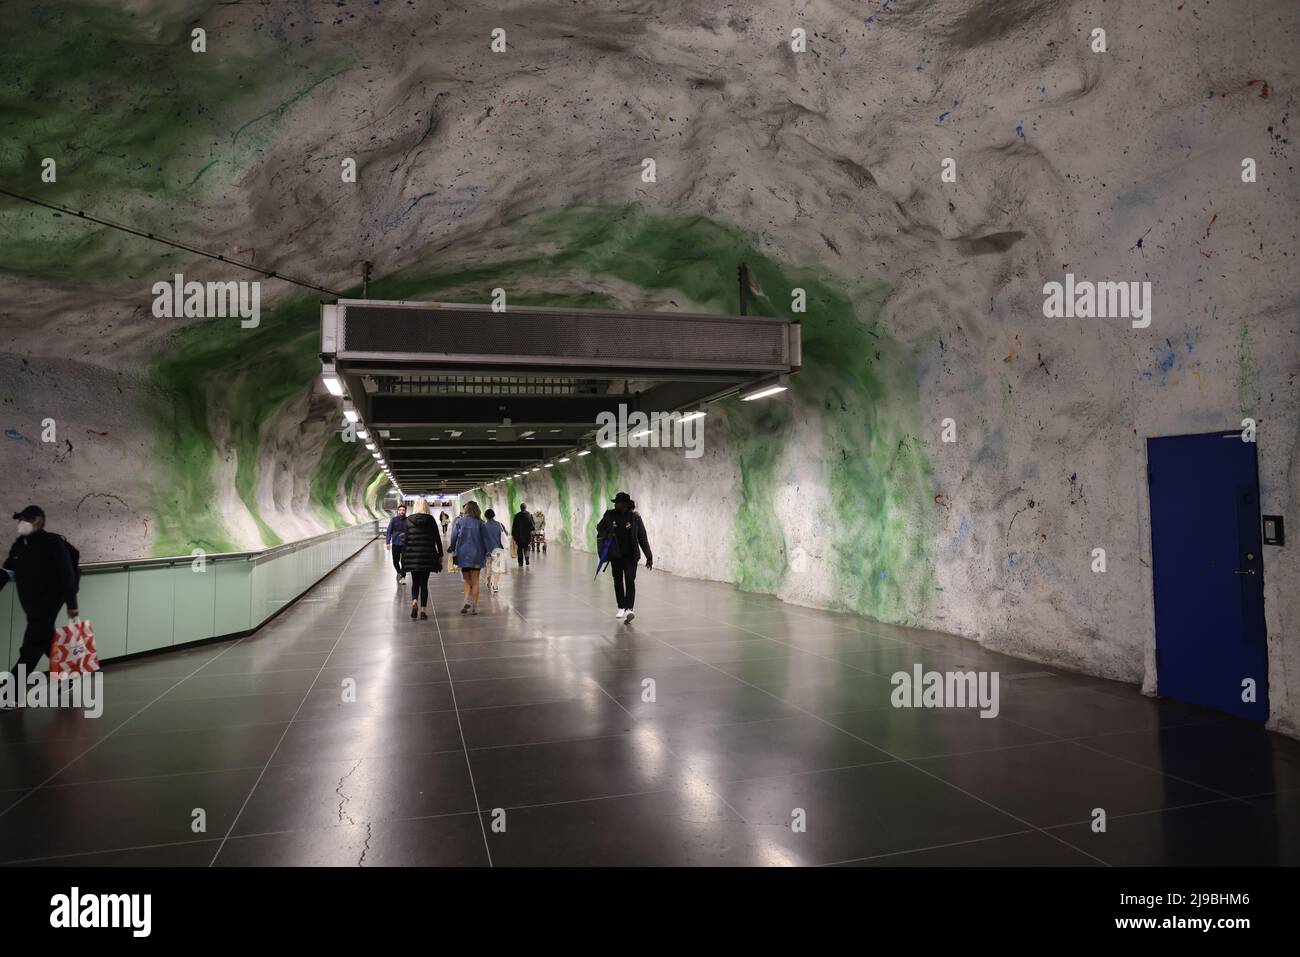 Decorated passage in a metro station (Tunnelbana) in Stockholm, Sweden Stock Photo